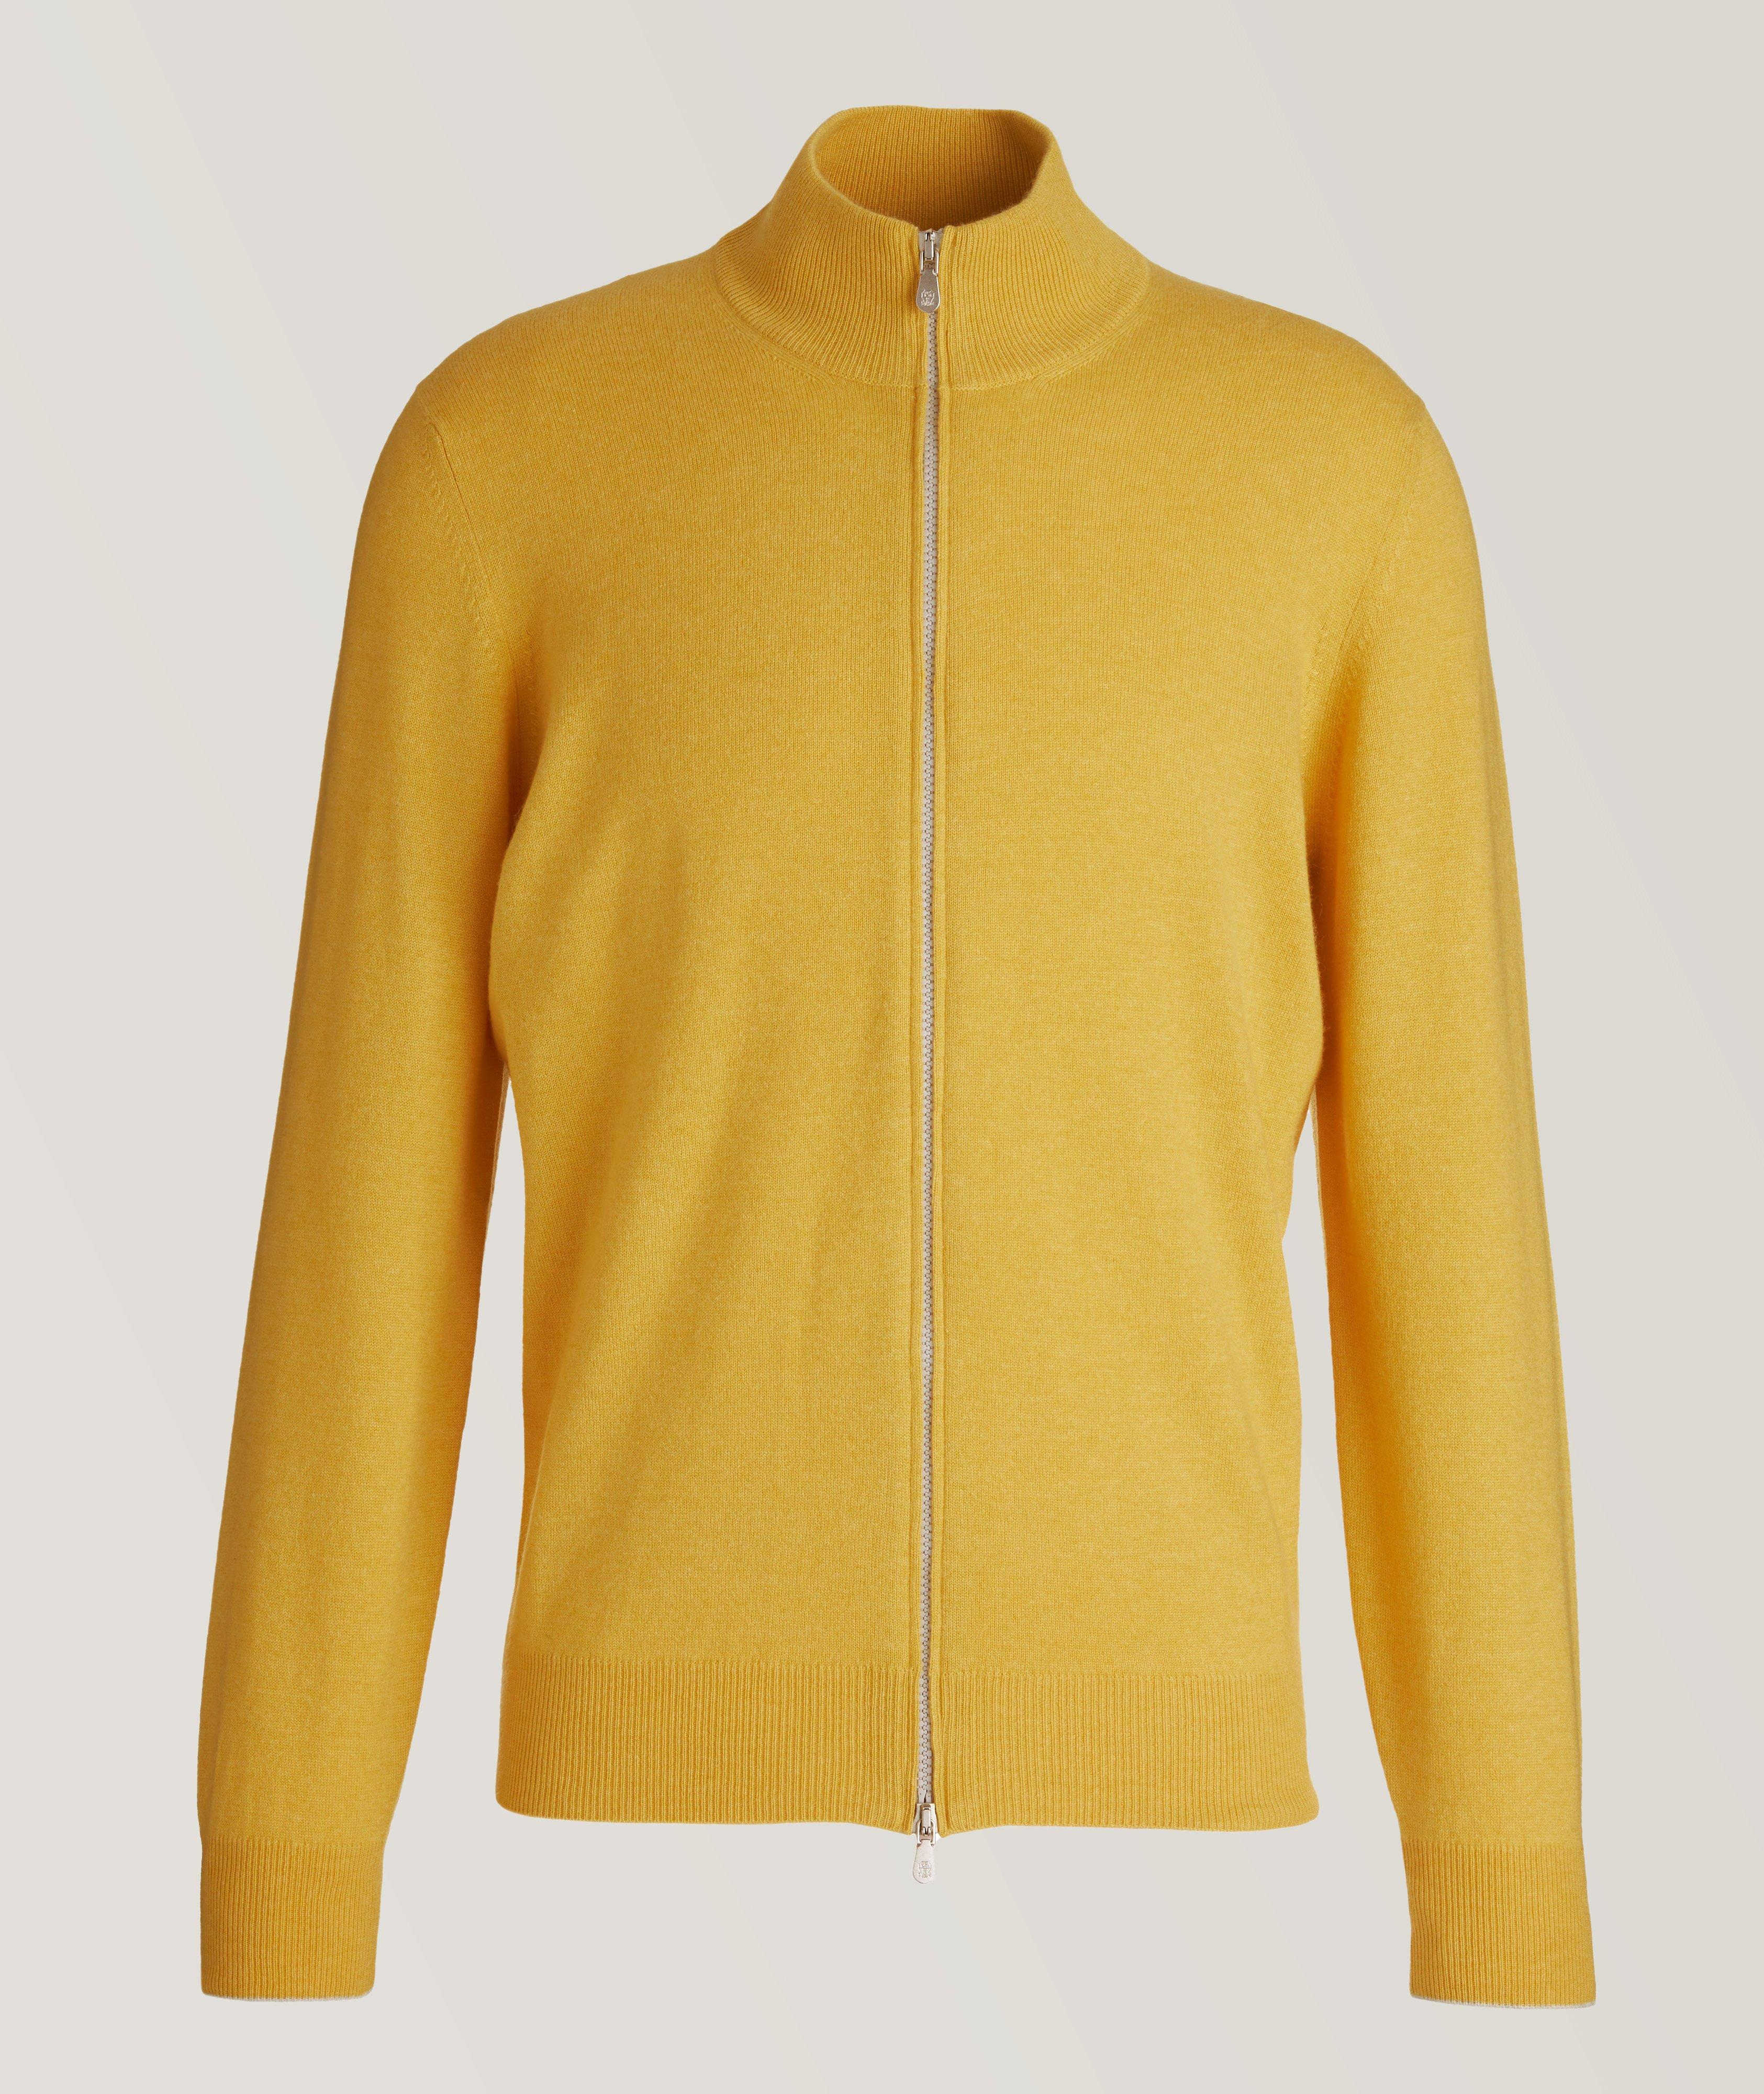 Full Zip Cashmere Knitted Cardigan image 0